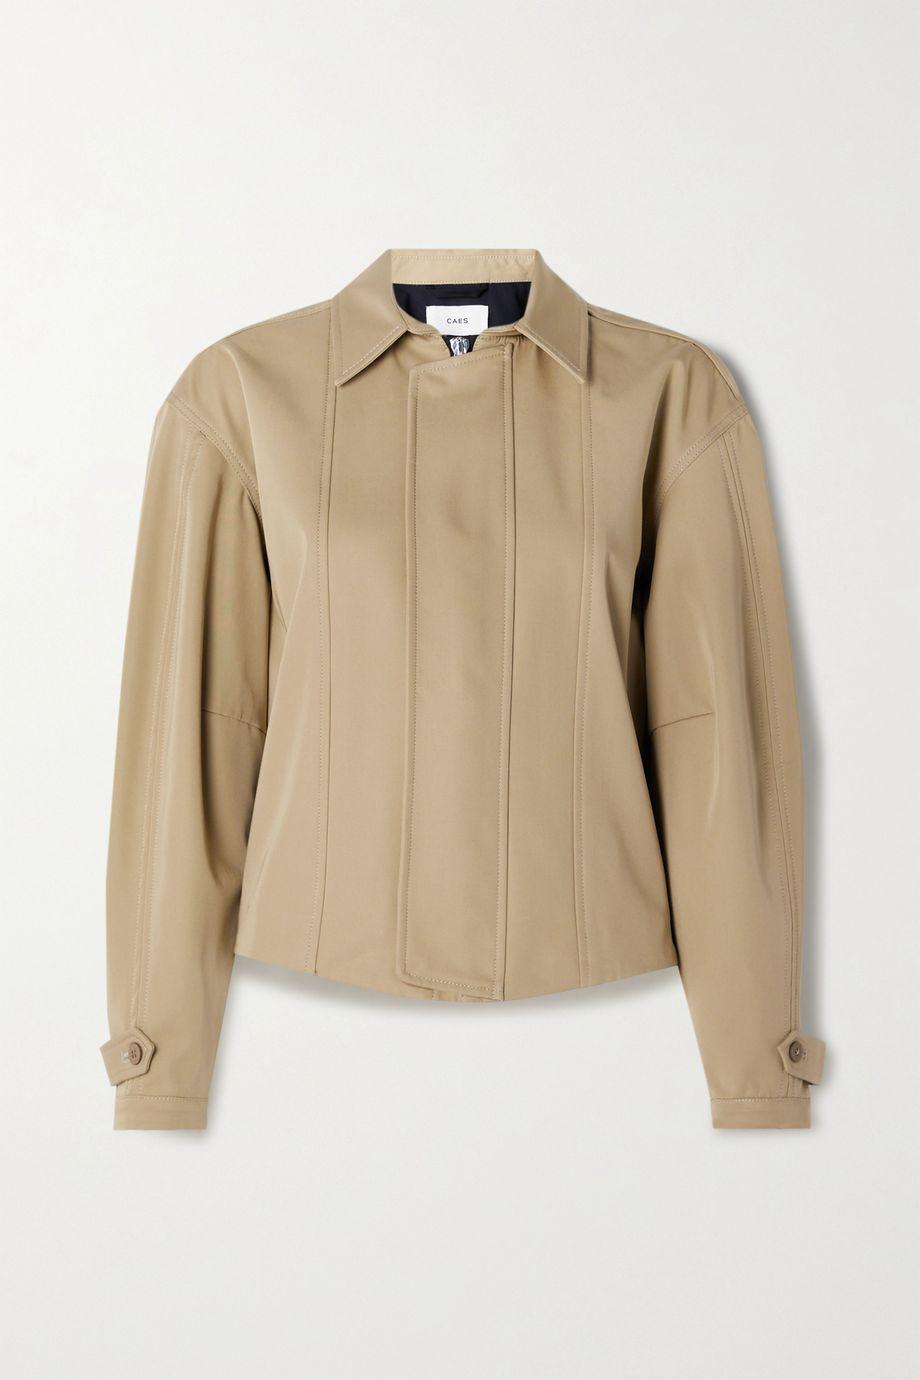 Cropped button-embellished cotton-twill trench jacket by CAES